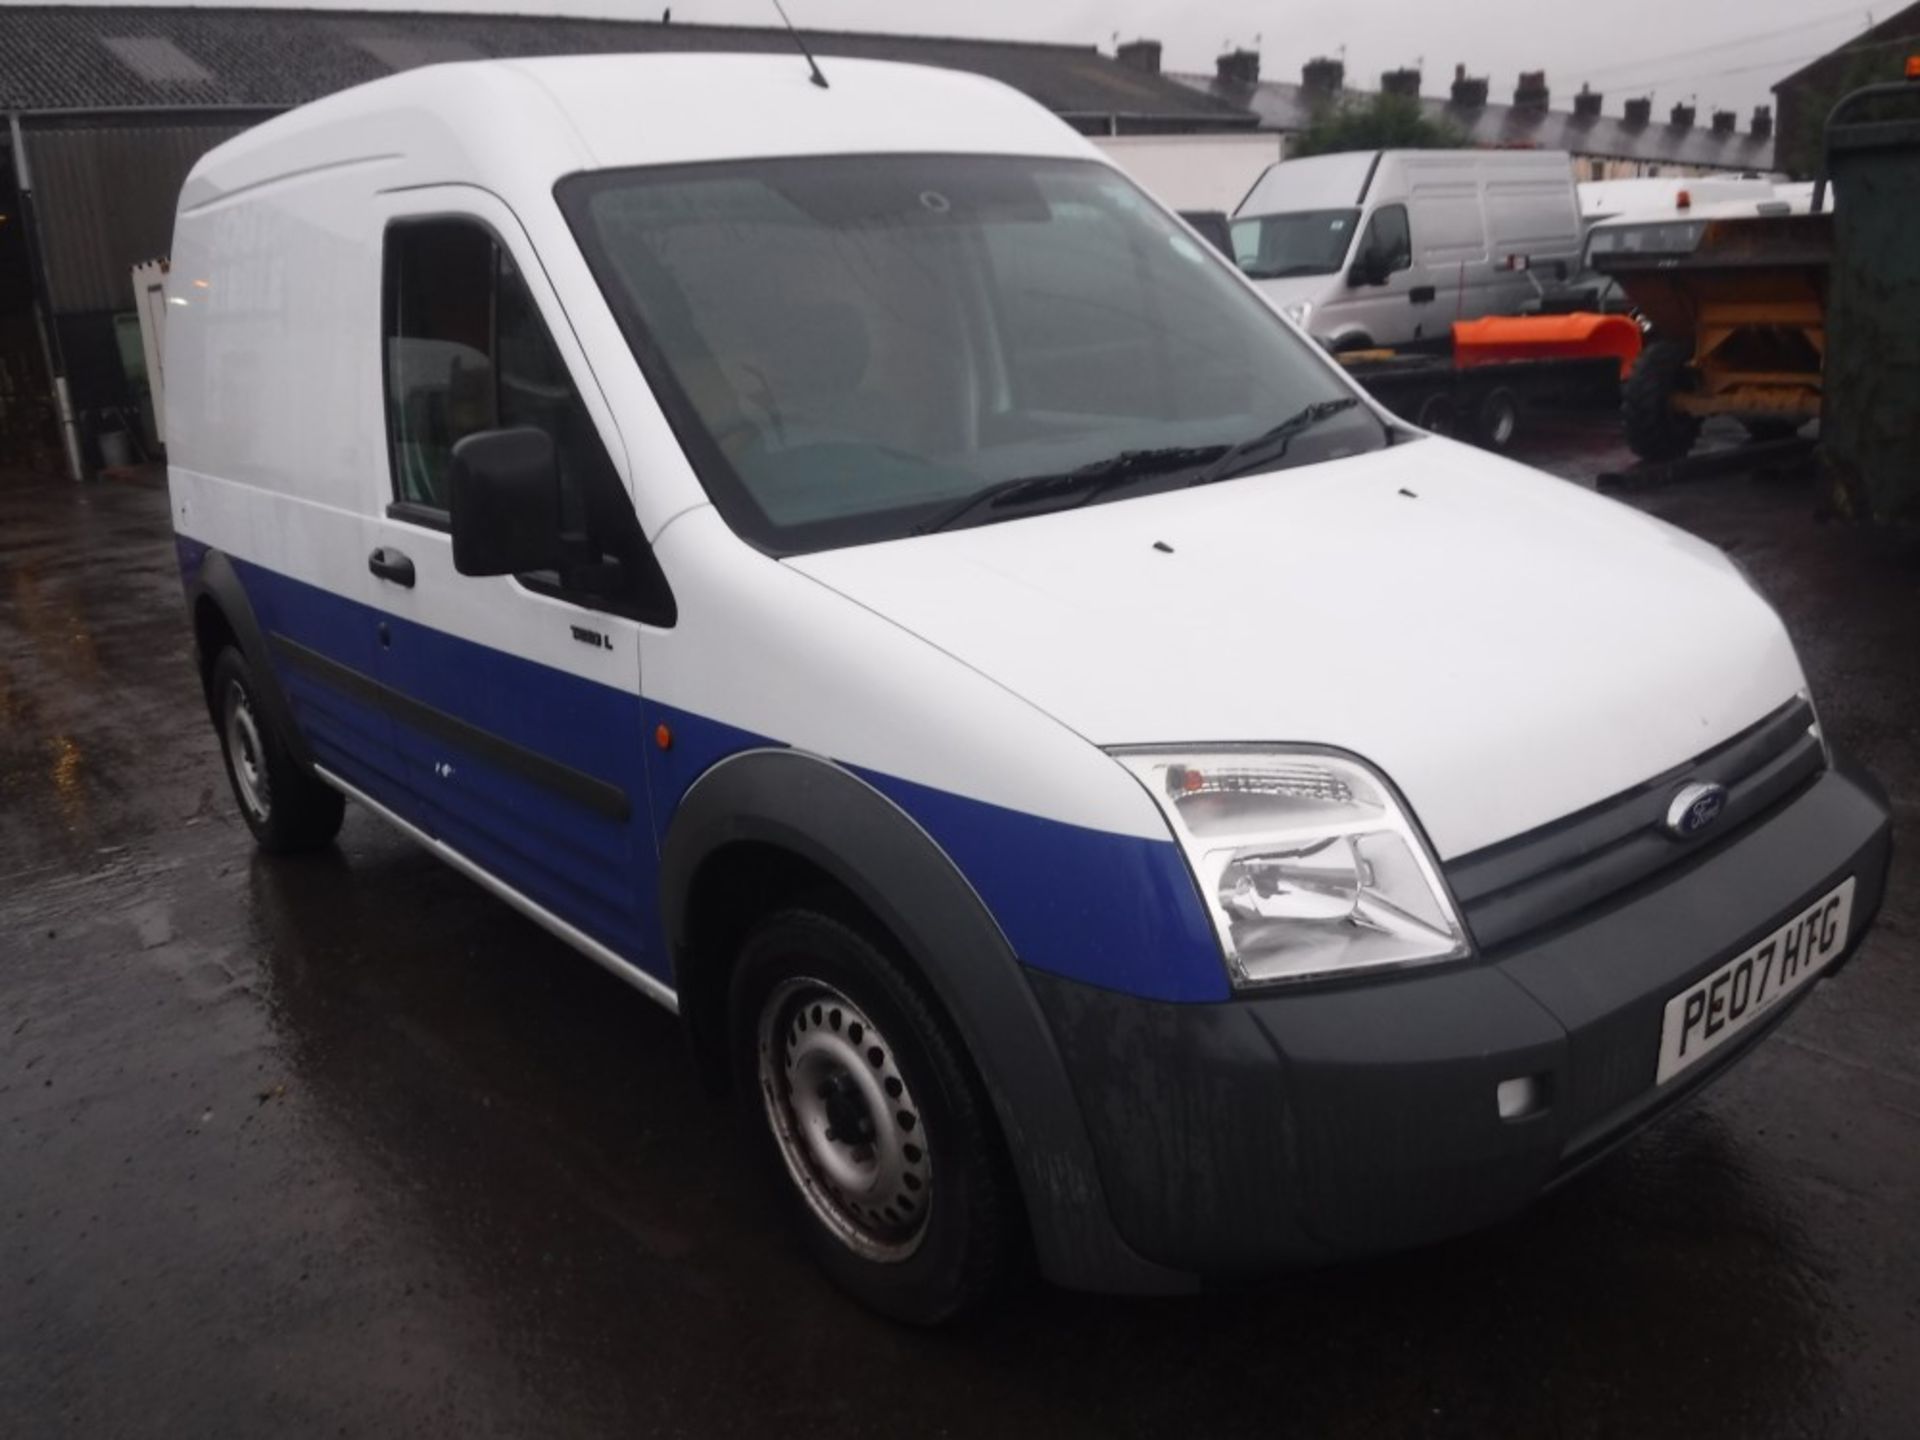 07 reg FORD TRANSIT CONNECT T230 L90, 1ST REG 06/07, TEST 05/17, 55800M, V5 HERE, 1 OWNER FROM